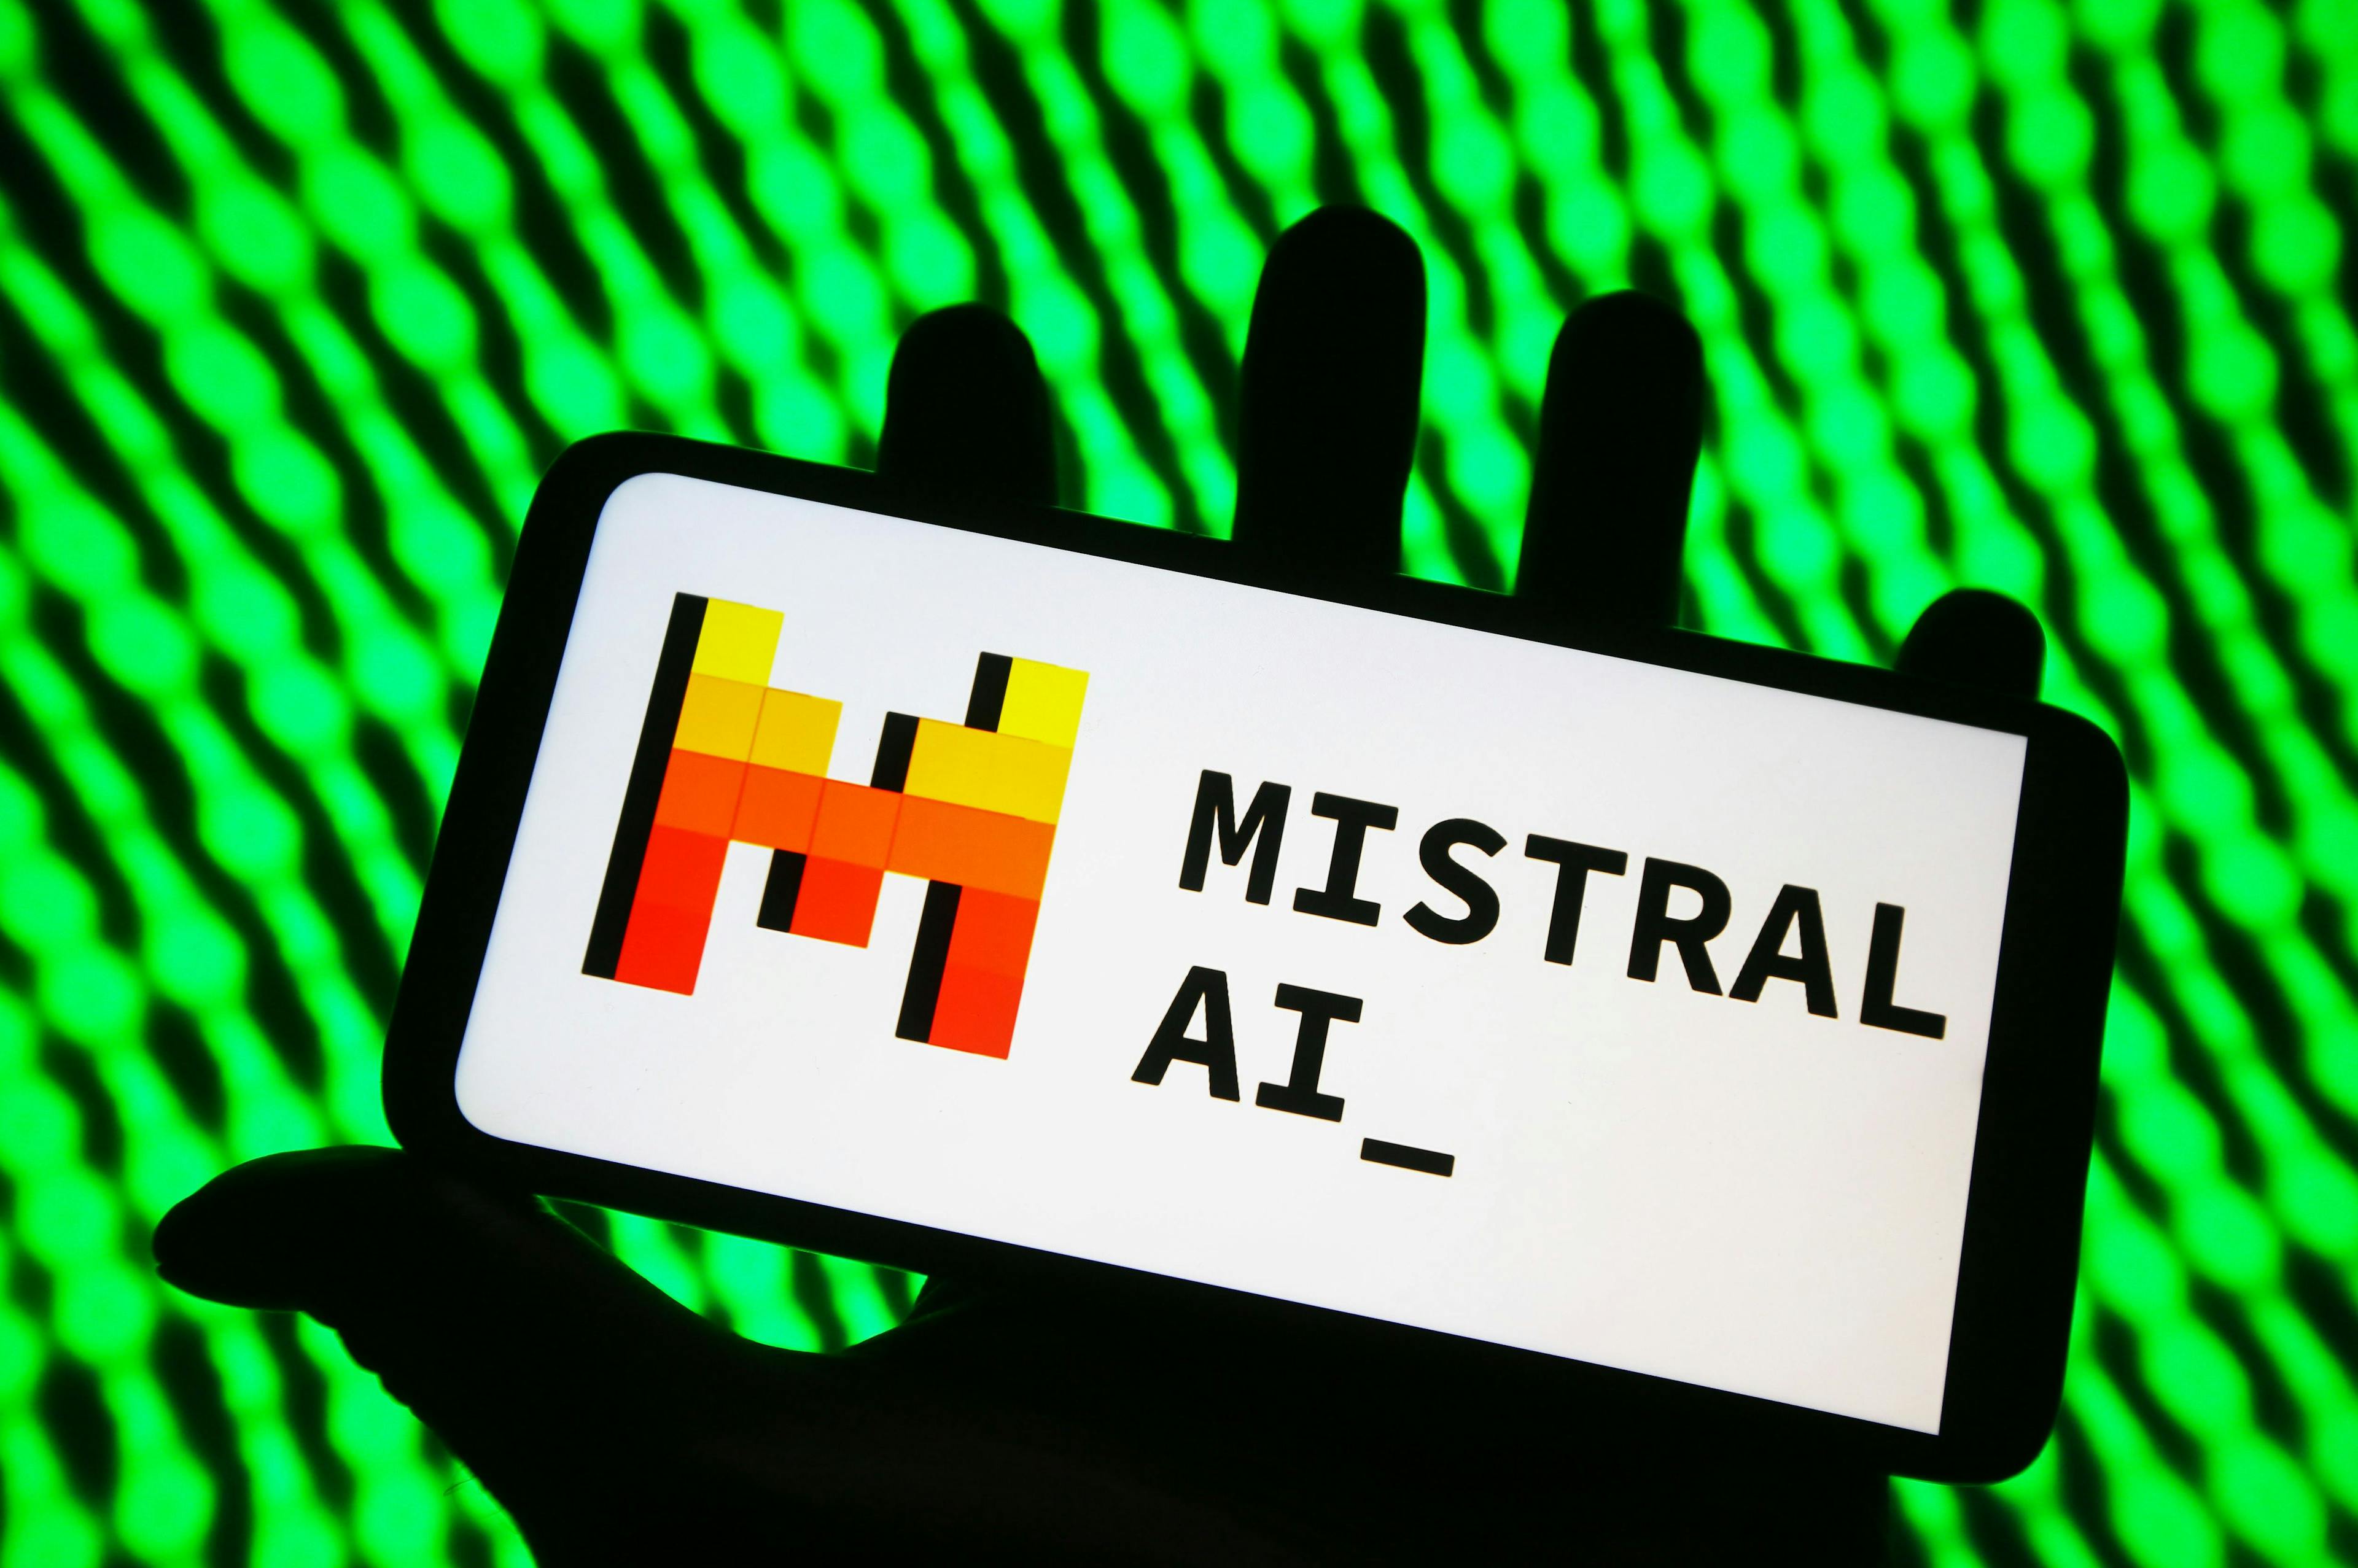 An image of a Mistral logo on a screen.